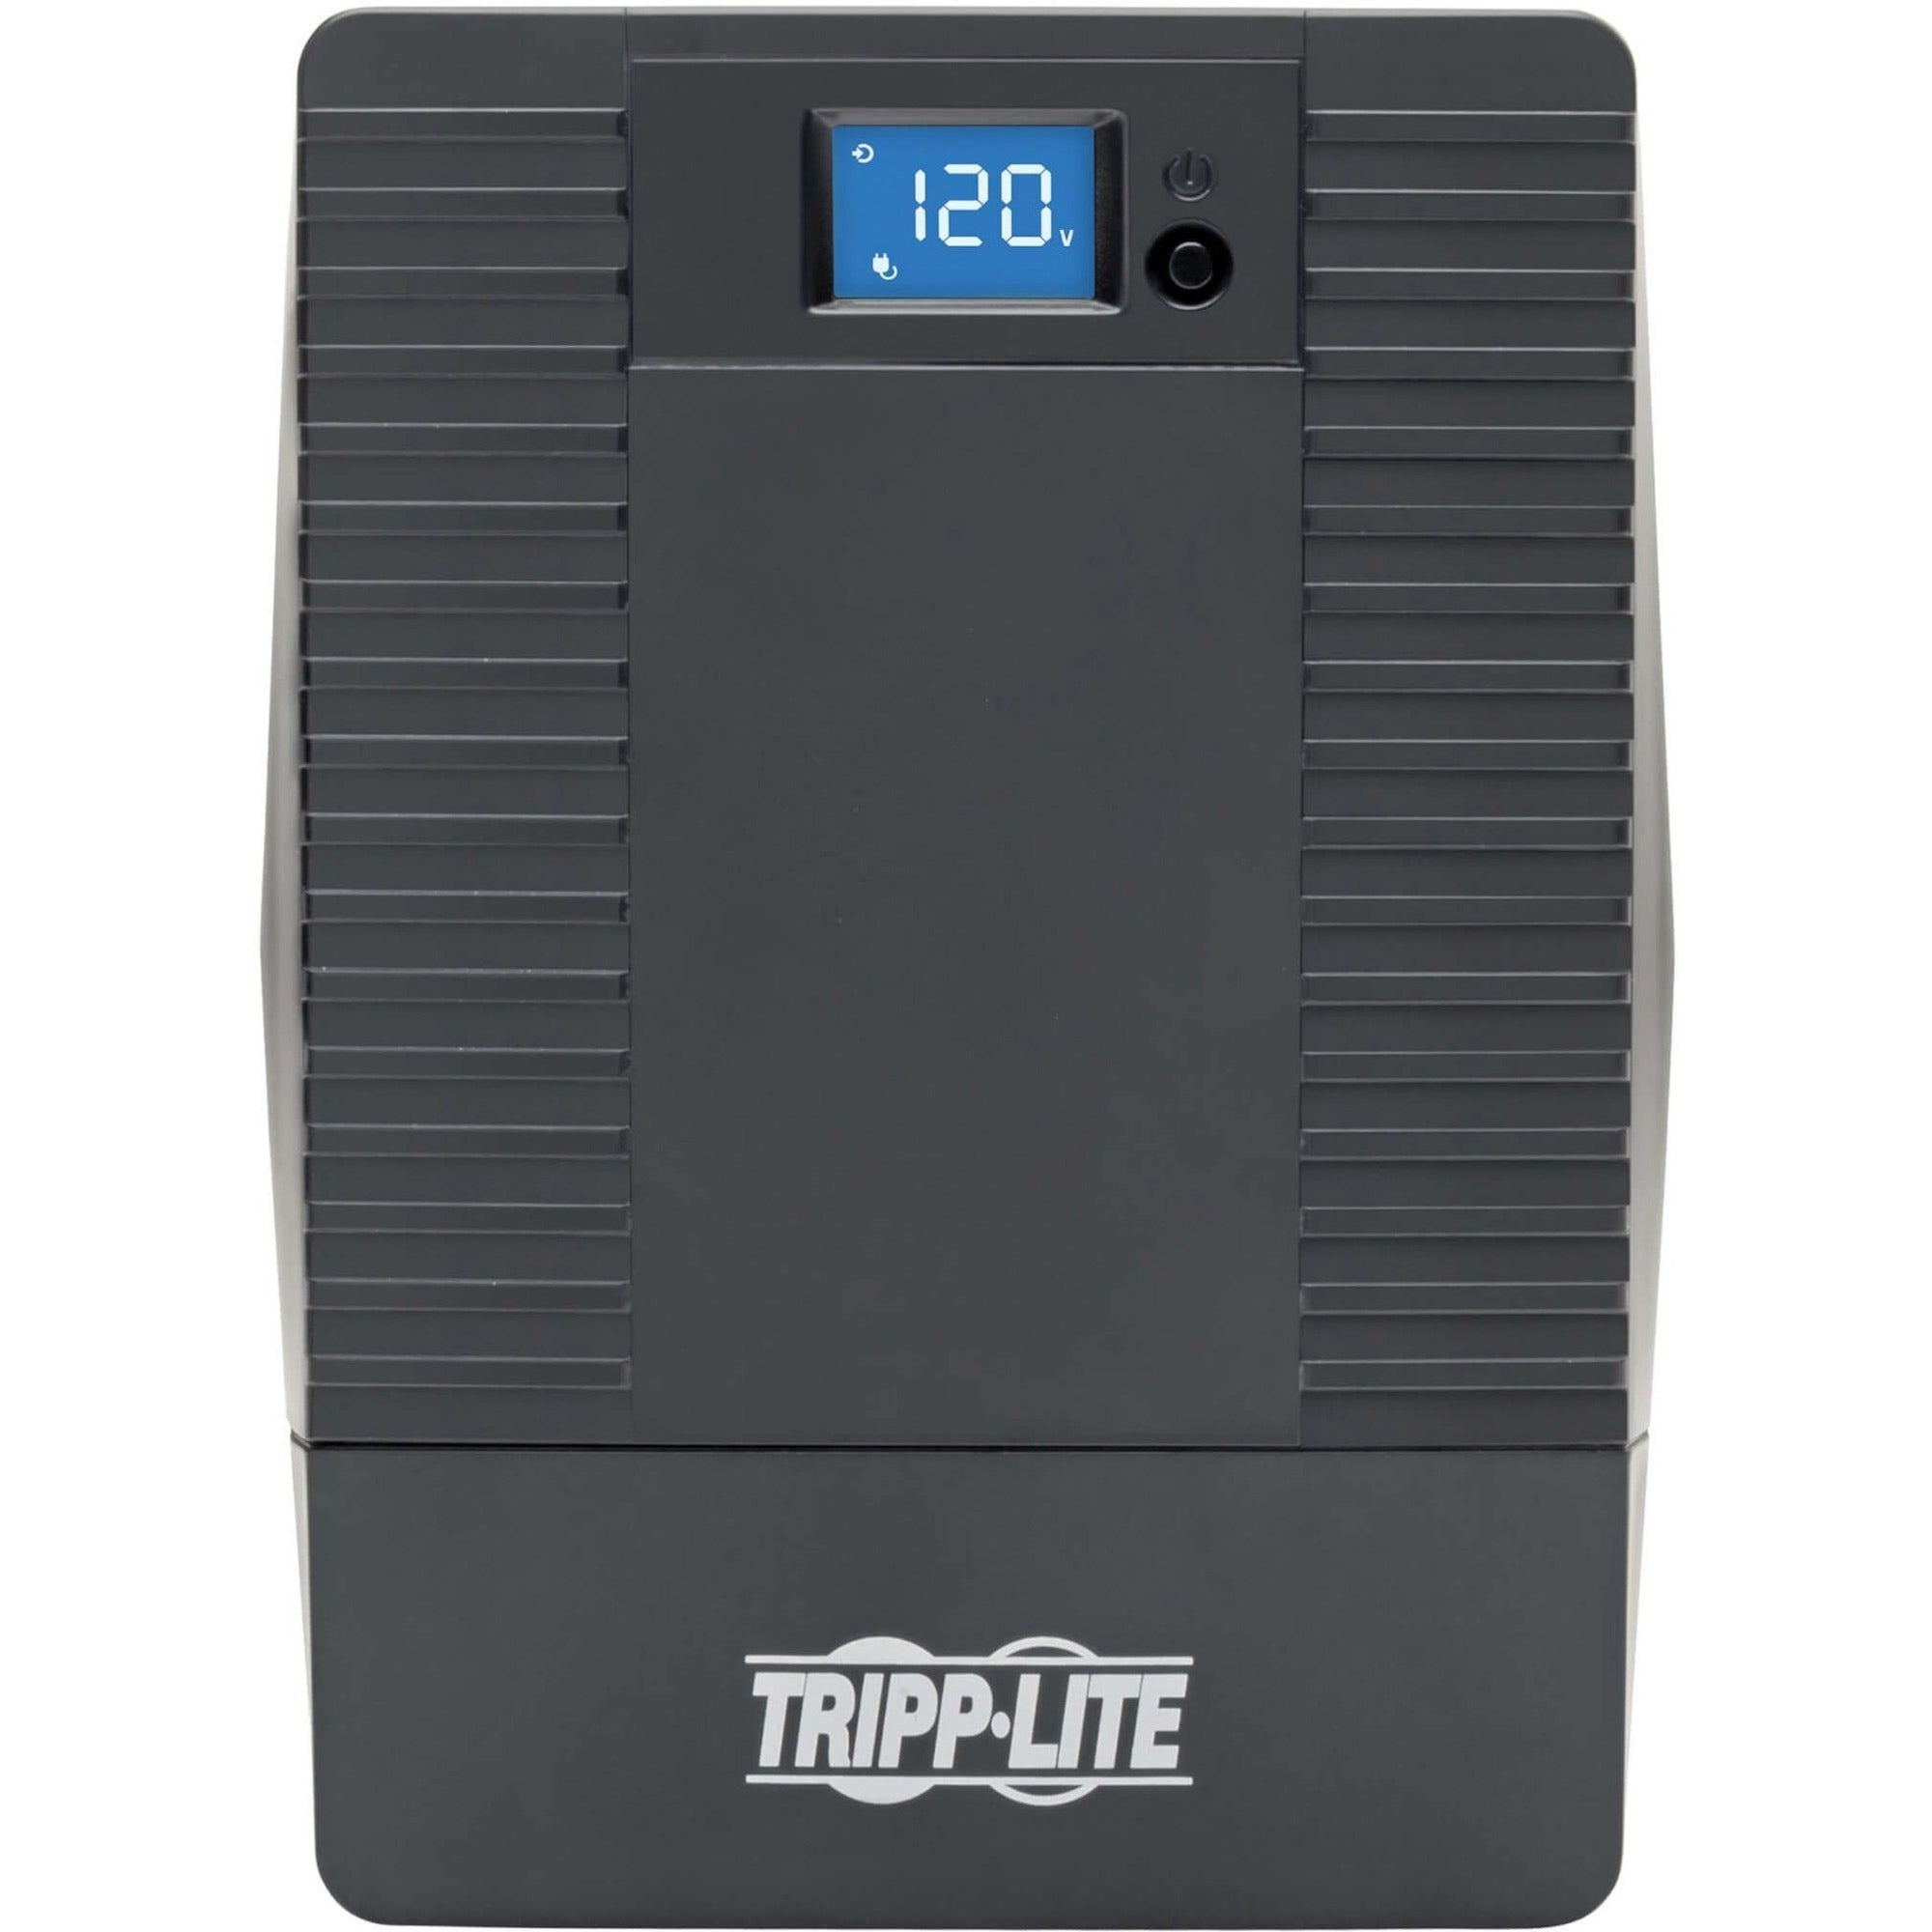 Tripp Lite by Eaton UPS OmniVS 120V 1500VA 940W Line-Interactive UPS Extended Run Tower USB port Battery Backup - Tower - 4 Hour Recharge - 5 Minute Stand-by - 110 V AC Input - 120 V AC Output - 2 x NEMA 5-15R, 6 x NEMA 5-15R - 